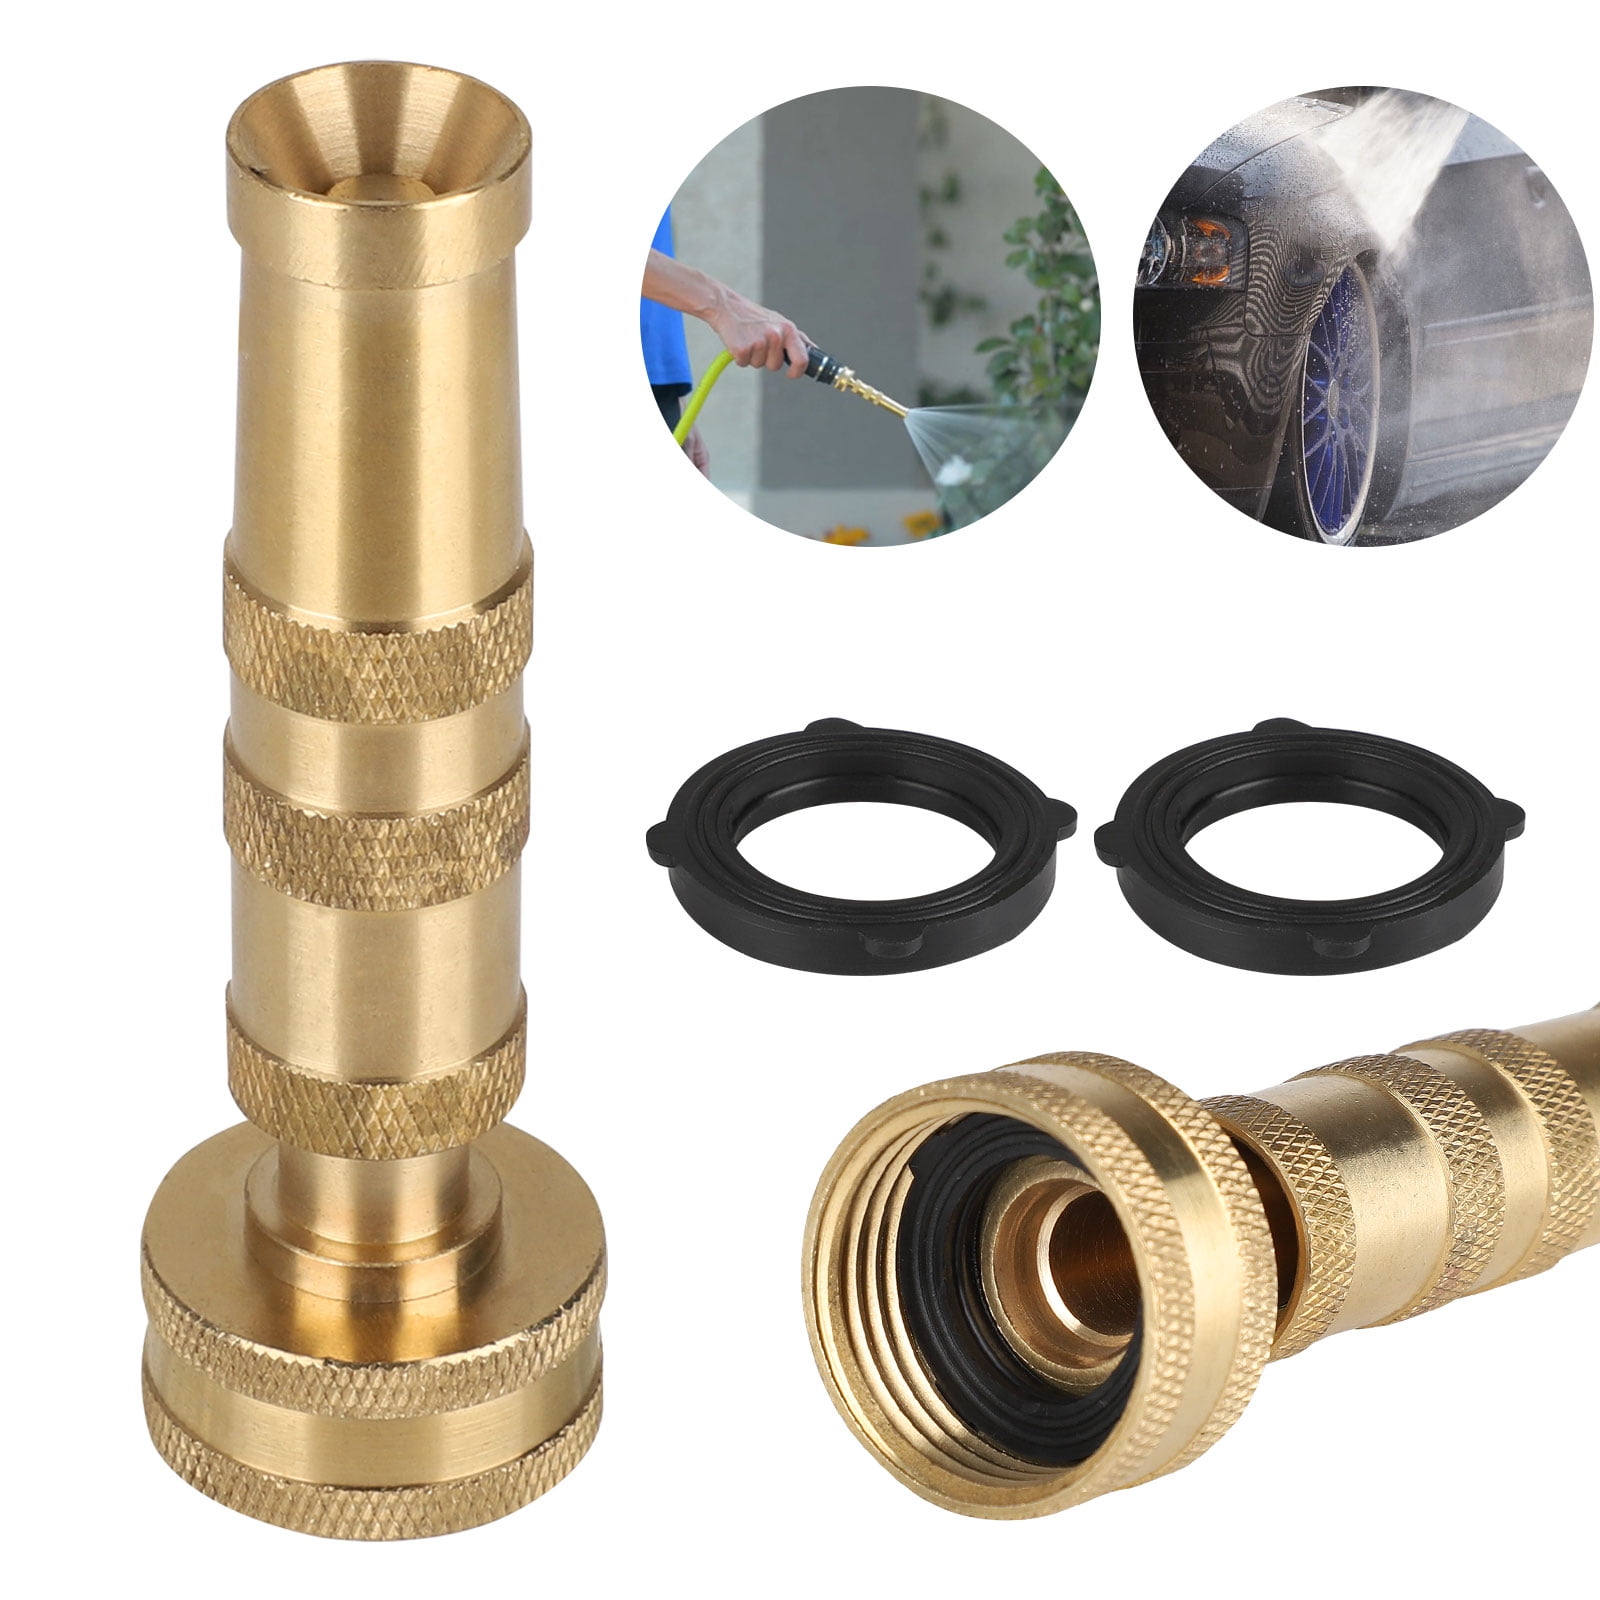 Hose Nozzle High Pressure for Car or Garden Solid Brass Heavy Duty 